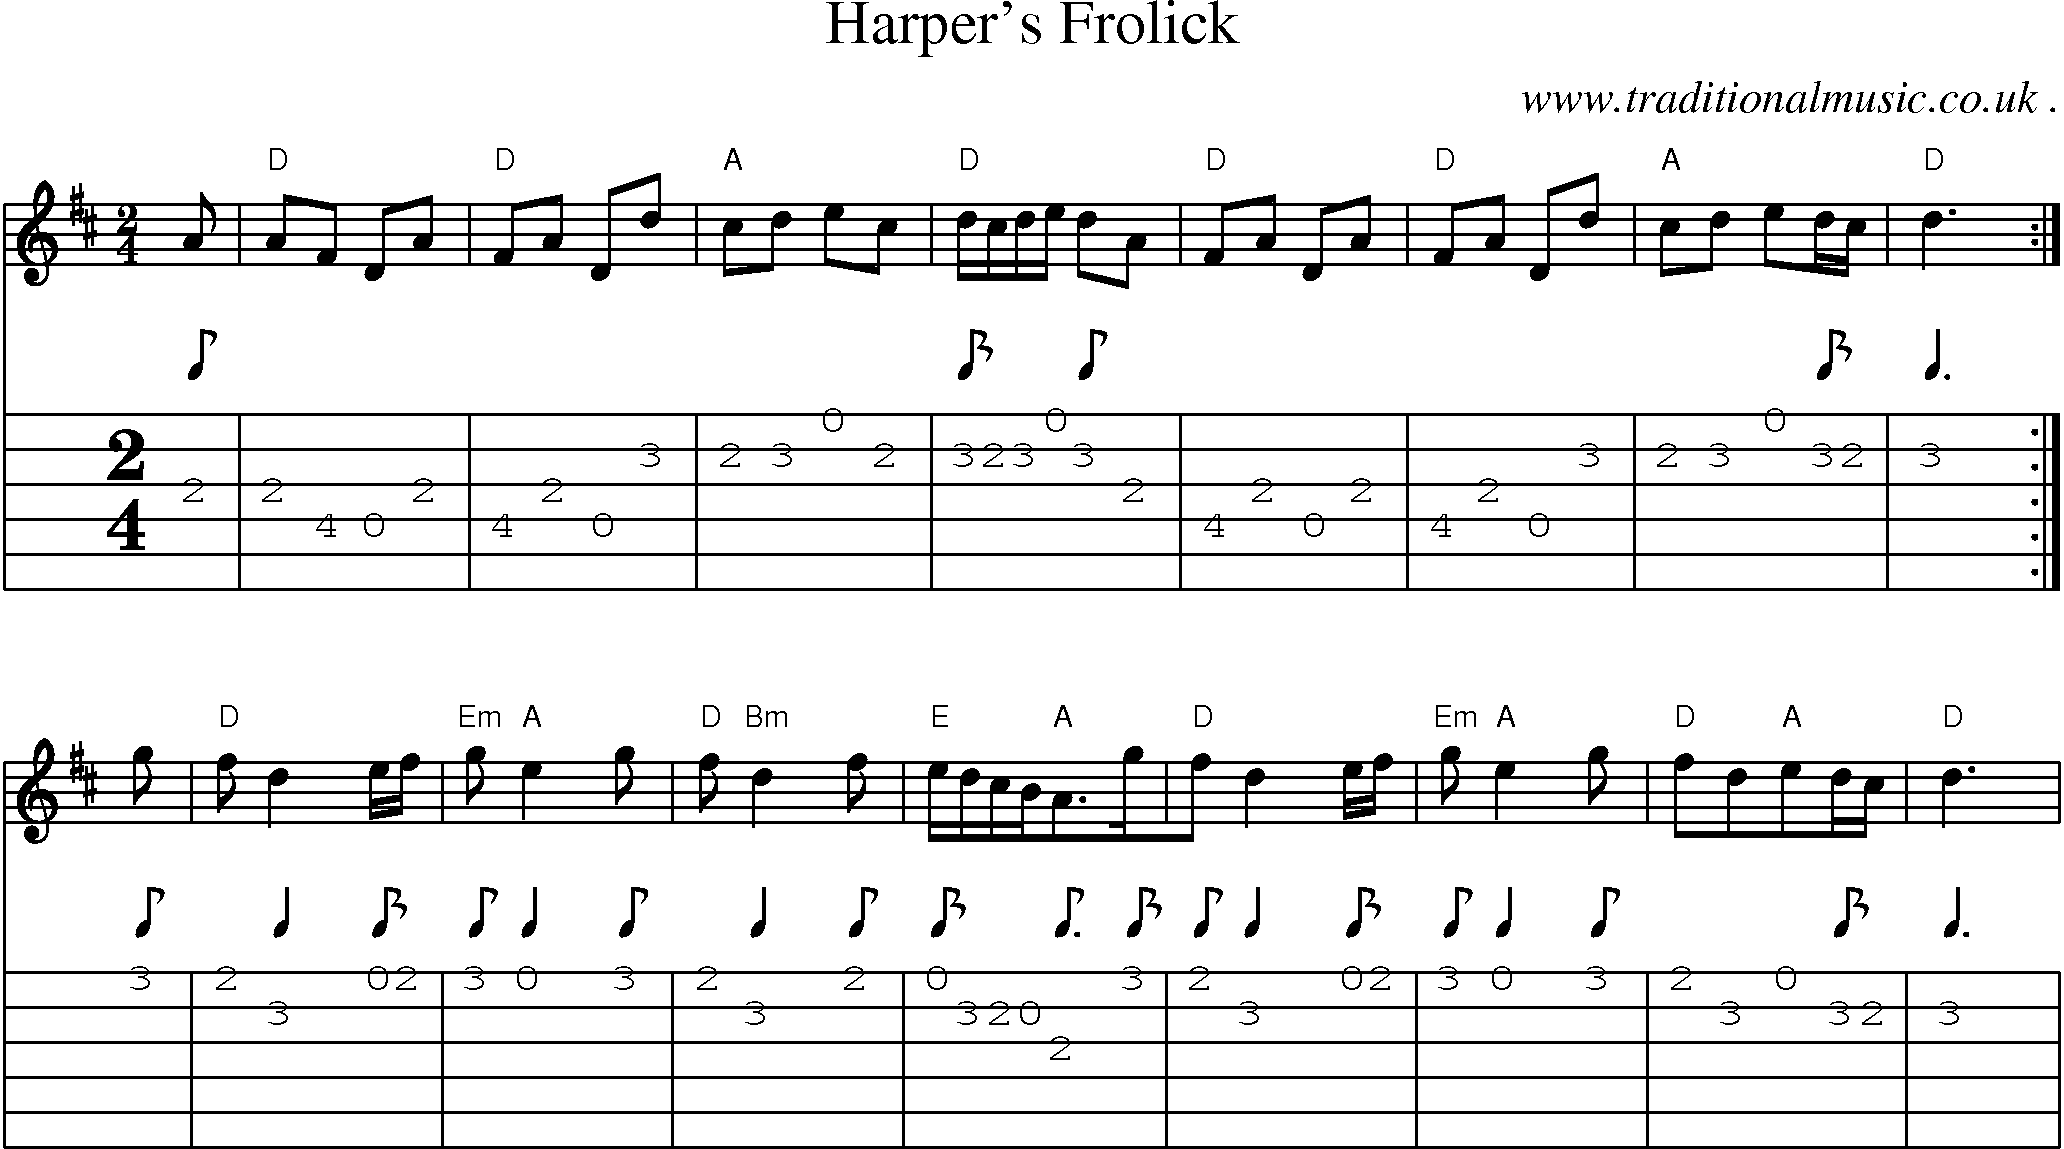 Sheet-Music and Guitar Tabs for Harpers Frolick